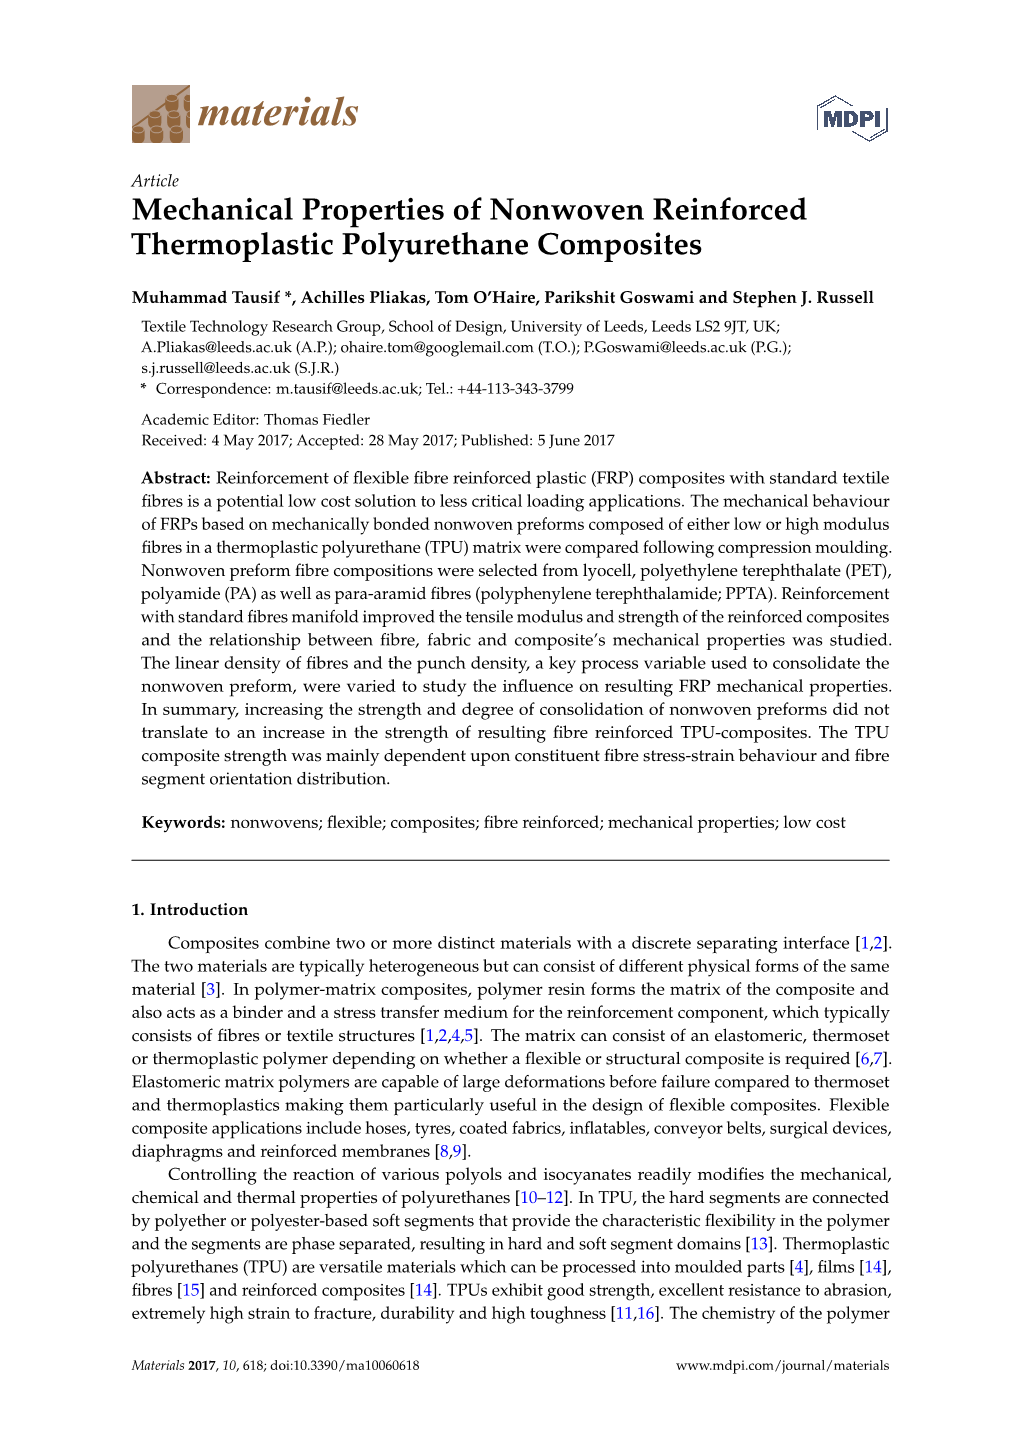 Mechanical Properties of Nonwoven Reinforced Thermoplastic Polyurethane Composites